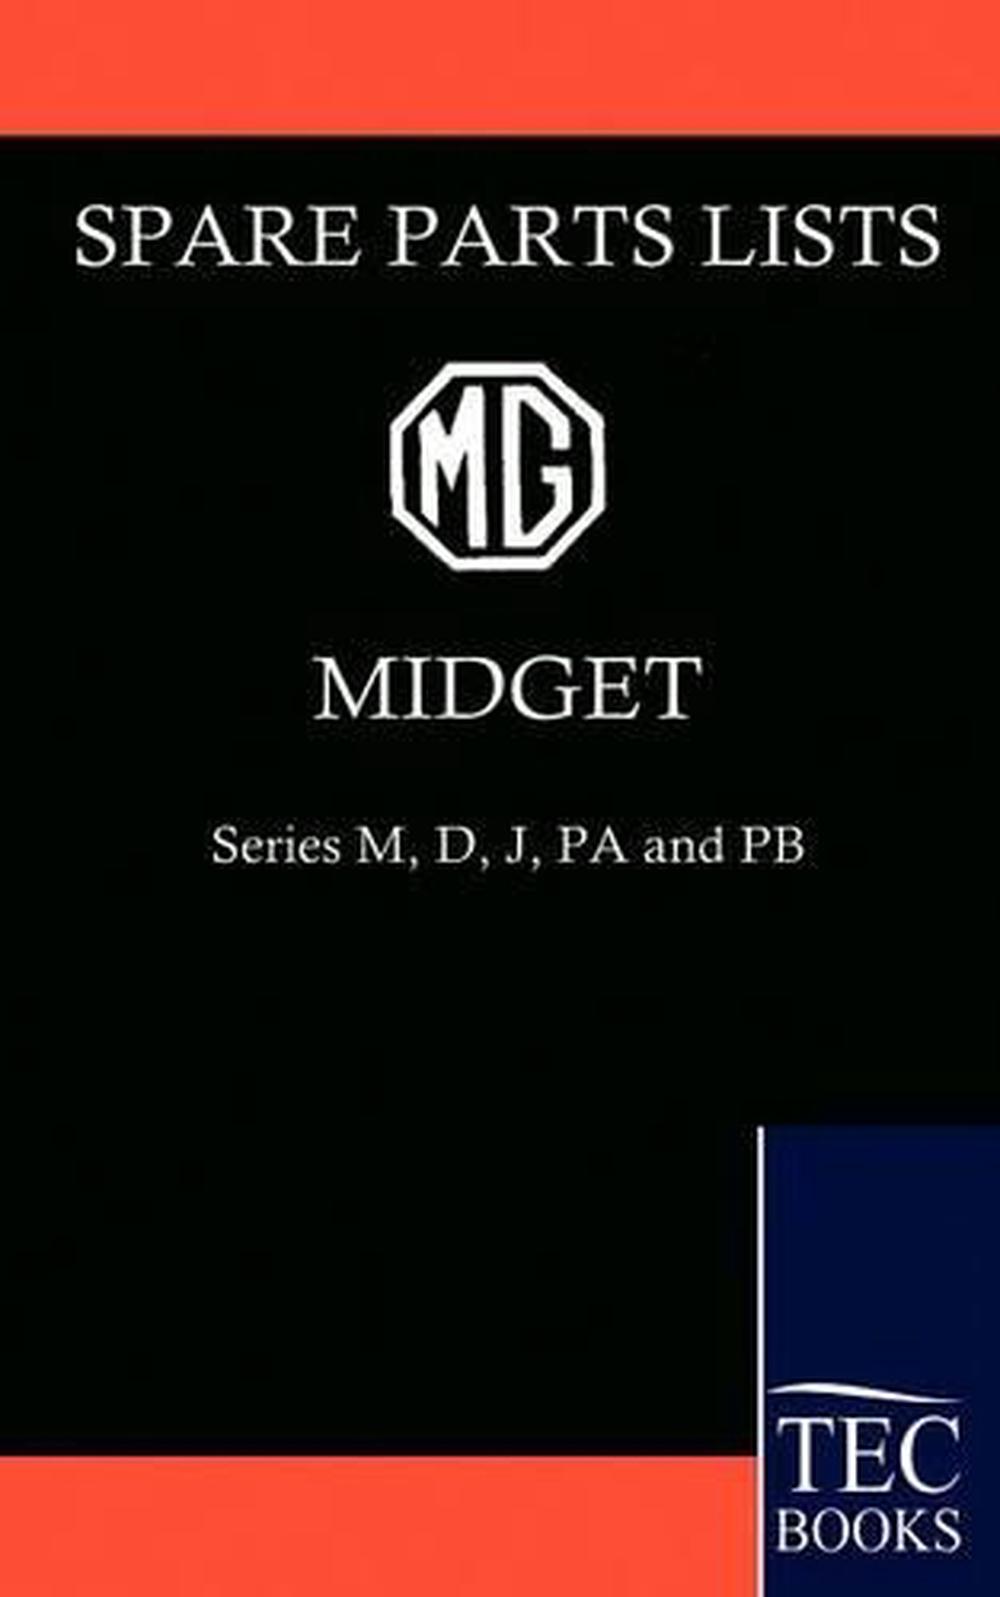 MG Midget Spare Parts Lists Type M, D, J, PA and PB (English